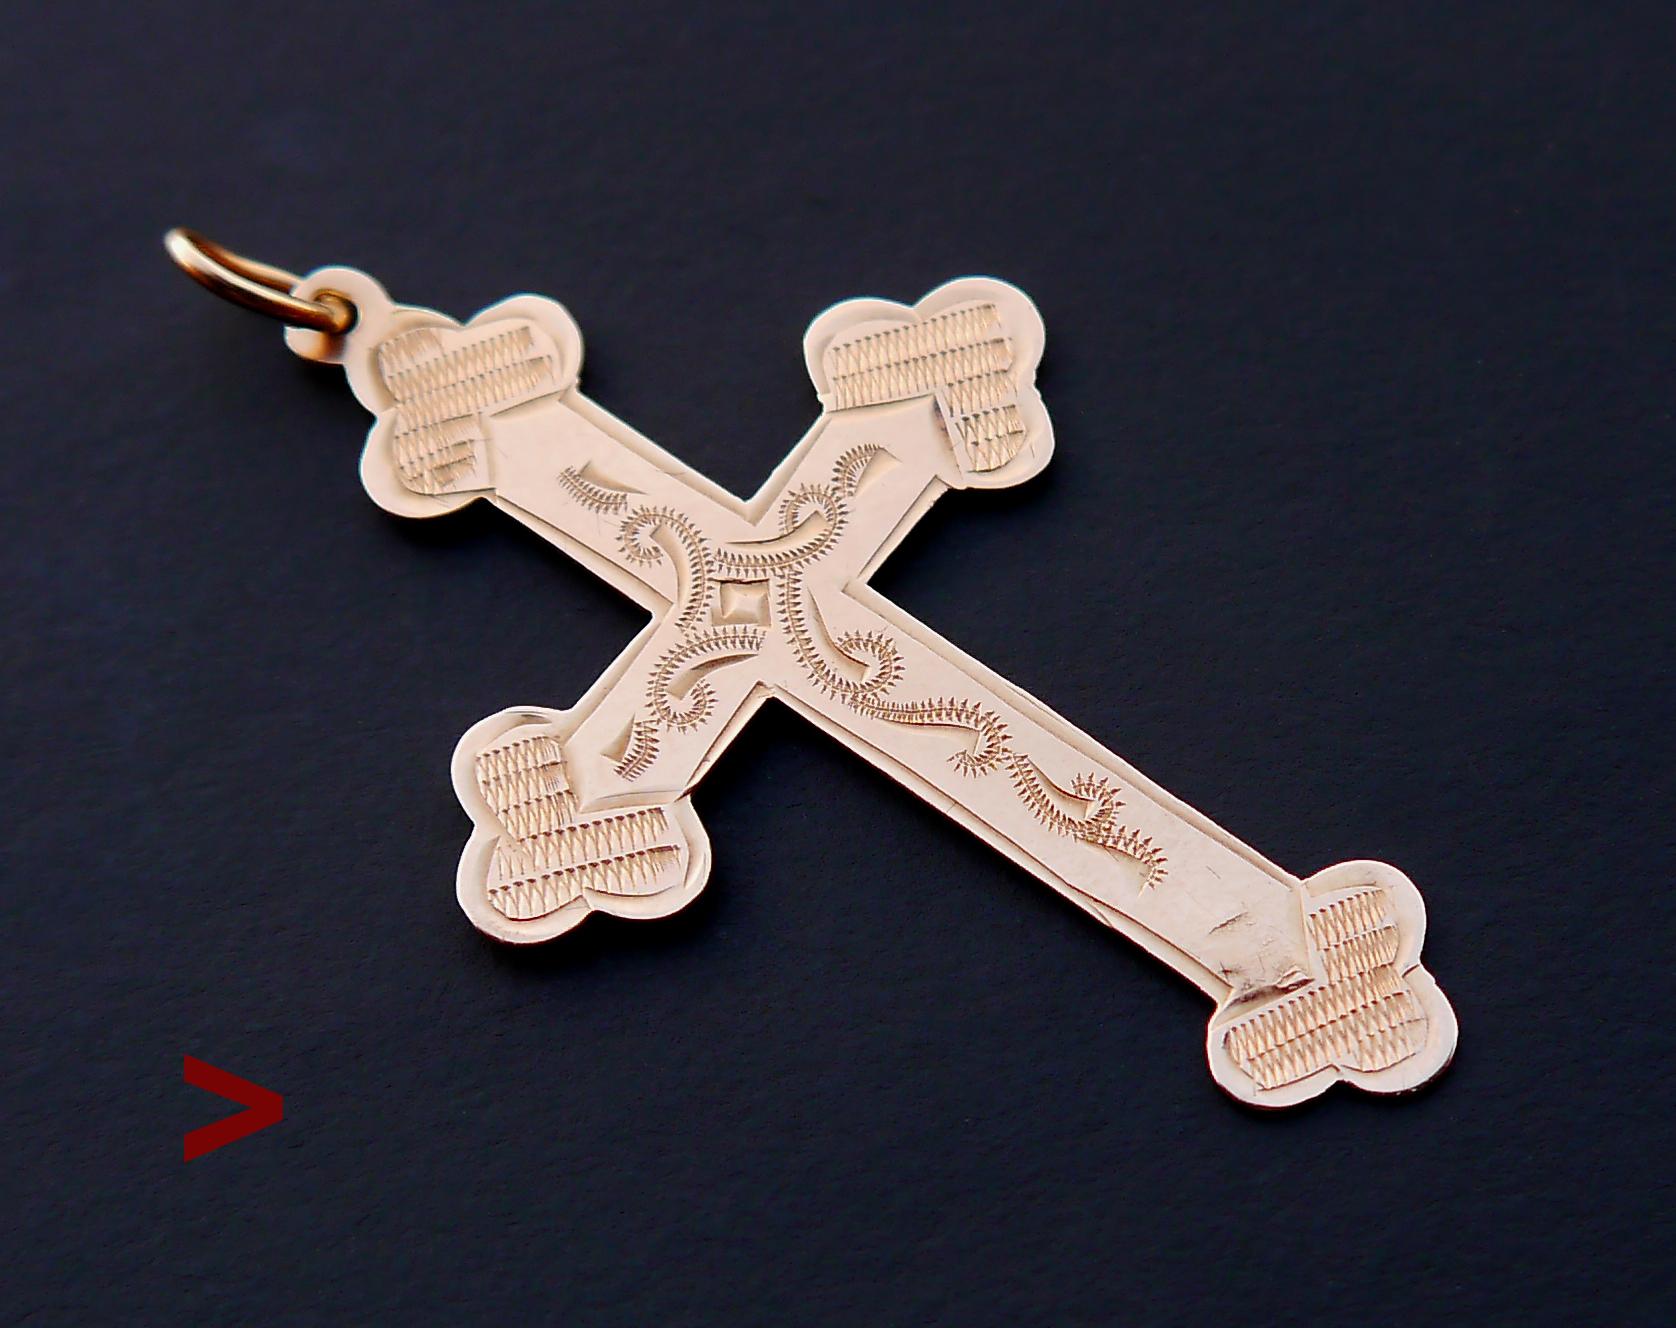 Ukrainian / Russian Orthodox Cross pendant in solid 56 / 14K Rose Gold. Delicate hand-engraved ornament.
Hallmarked with old Russian Gold standard 56 zolotniks (14K) used between 1908 -1917. Assay of Kiev city.

Maker's initials in Cyrillic 